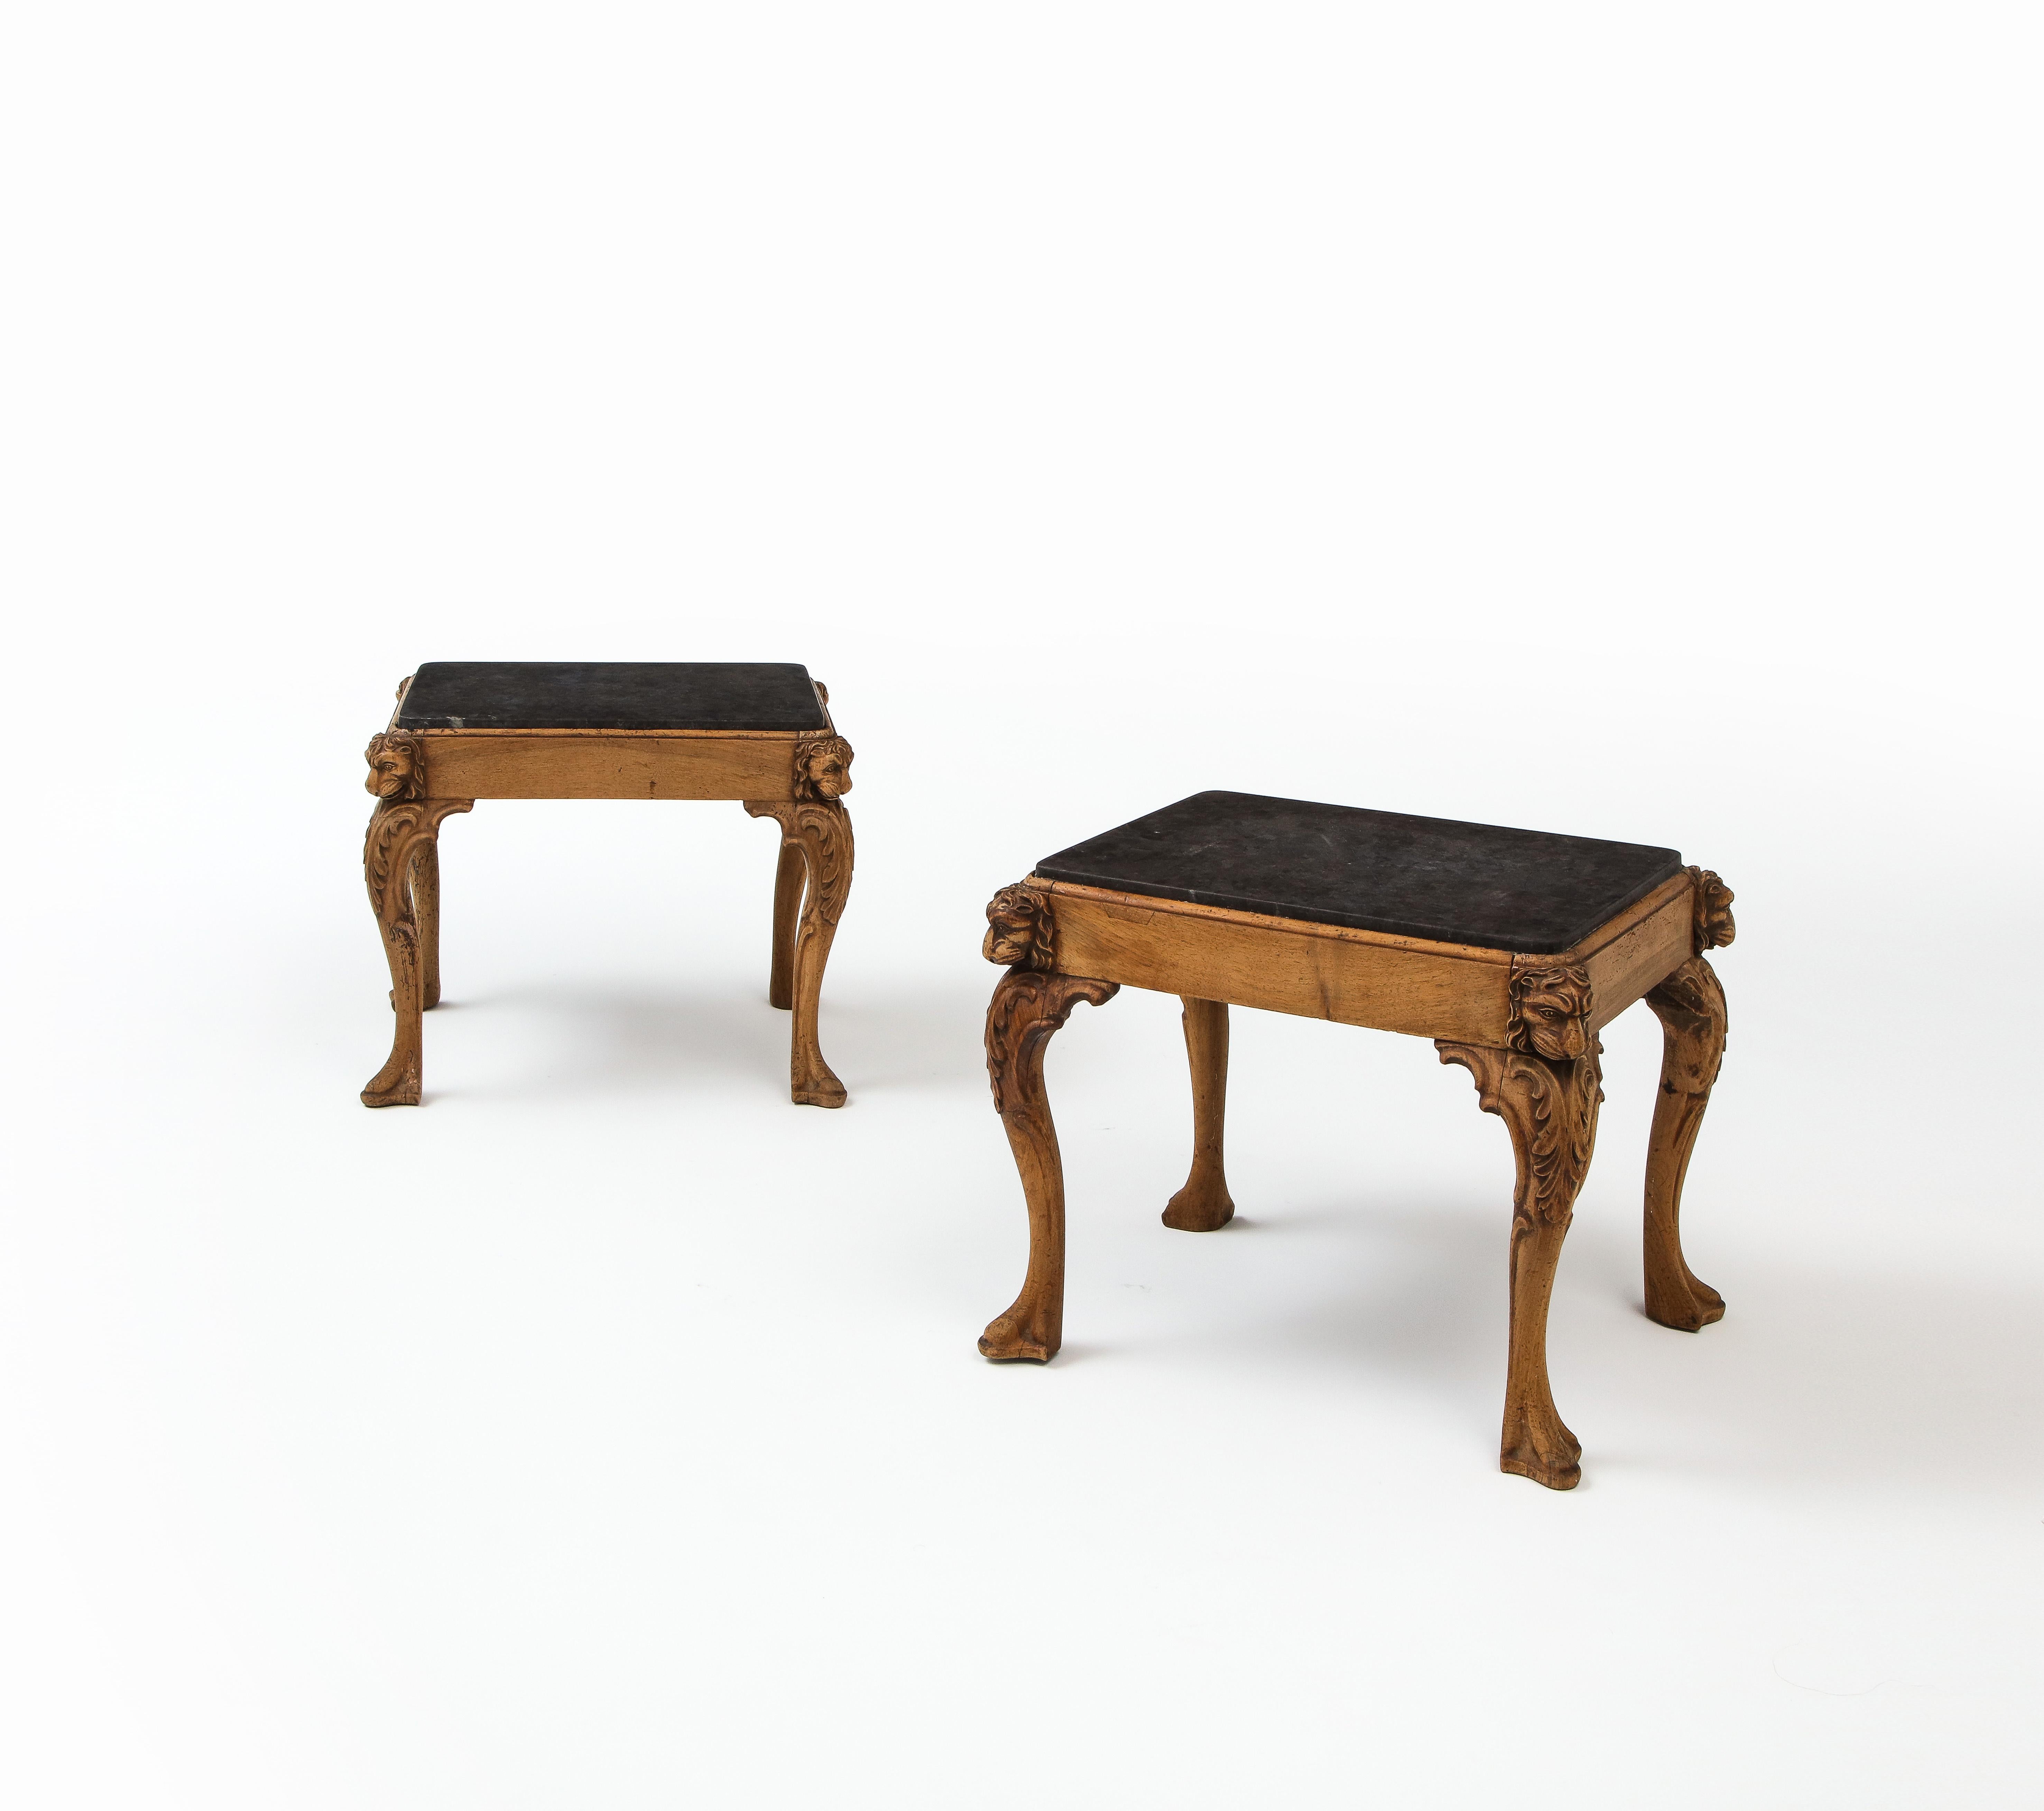 Pair of Queen Anne Style Cabriole Leg Coffee Tables, England, 19th Century For Sale 6